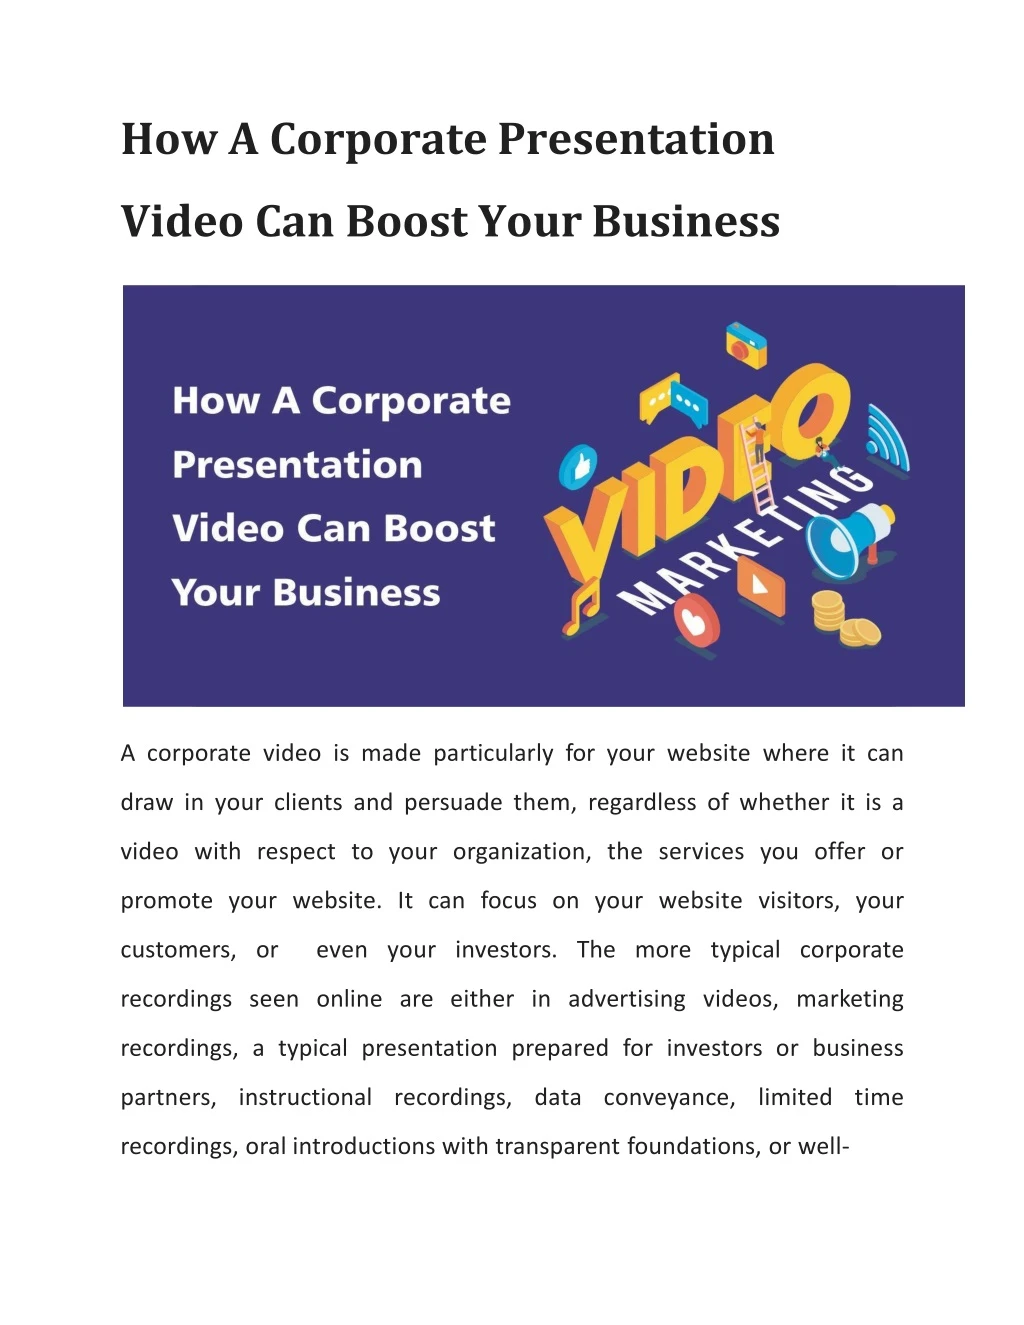 how a corporate presentation video can boost your business